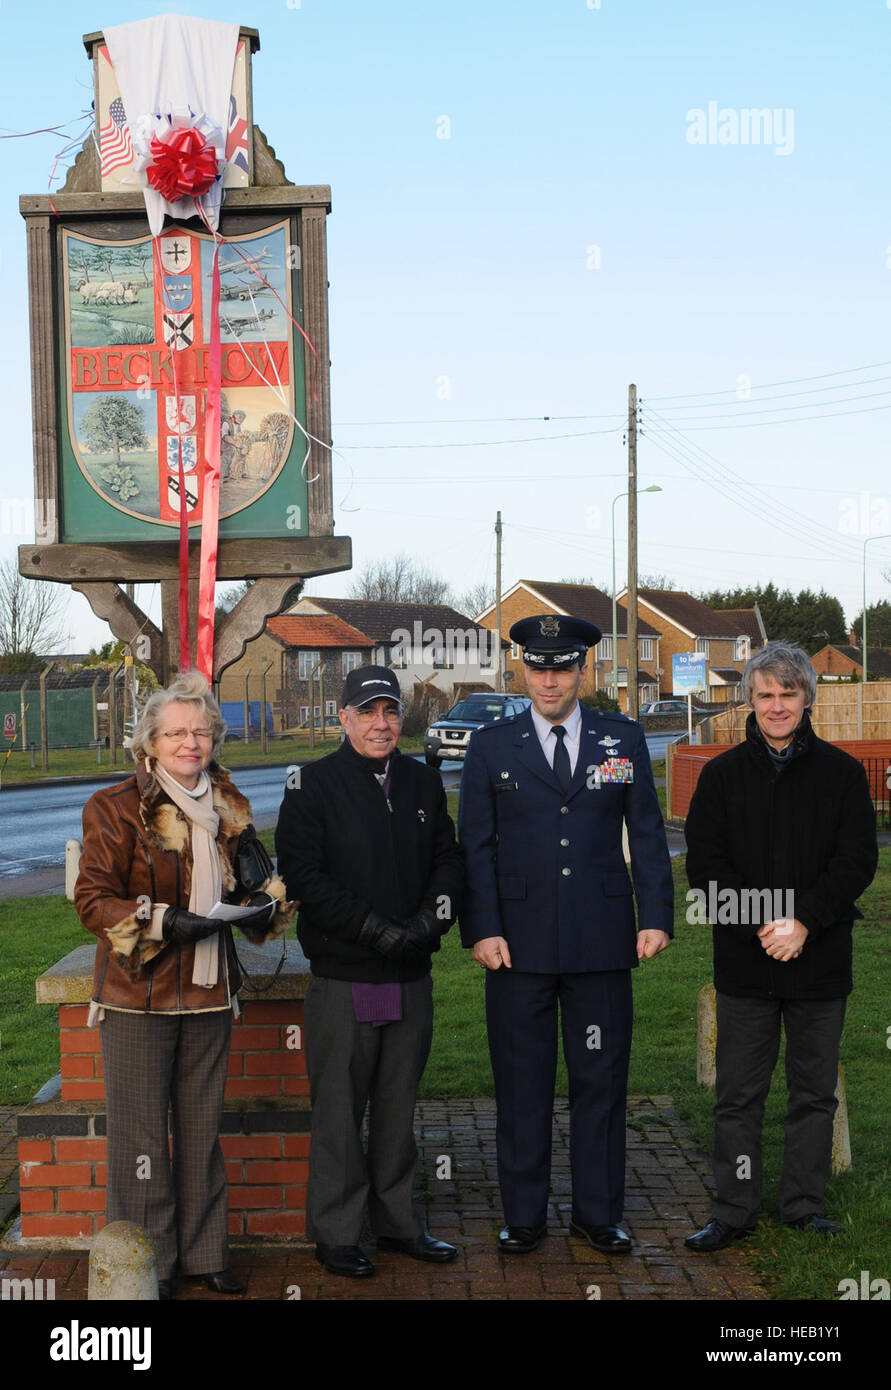 From left, Kay Sallis, chairman of Beck Row, Holywell Row and Kenny Hill Parish Council, Ken Thompson, British-American Committee chairman, Col. Christopher Kulas, 100th Air Refueling Wing commander, and Gary Rogers, 100th ARW Public Affairs graphic artist, unveil the new Beck Row sign Feb. 2, 2013, at Beck Row, England. The new sign symbolizes the unity between RAF Mildenhall and the local community.   Master Sgt. Latisha Cole Stock Photo